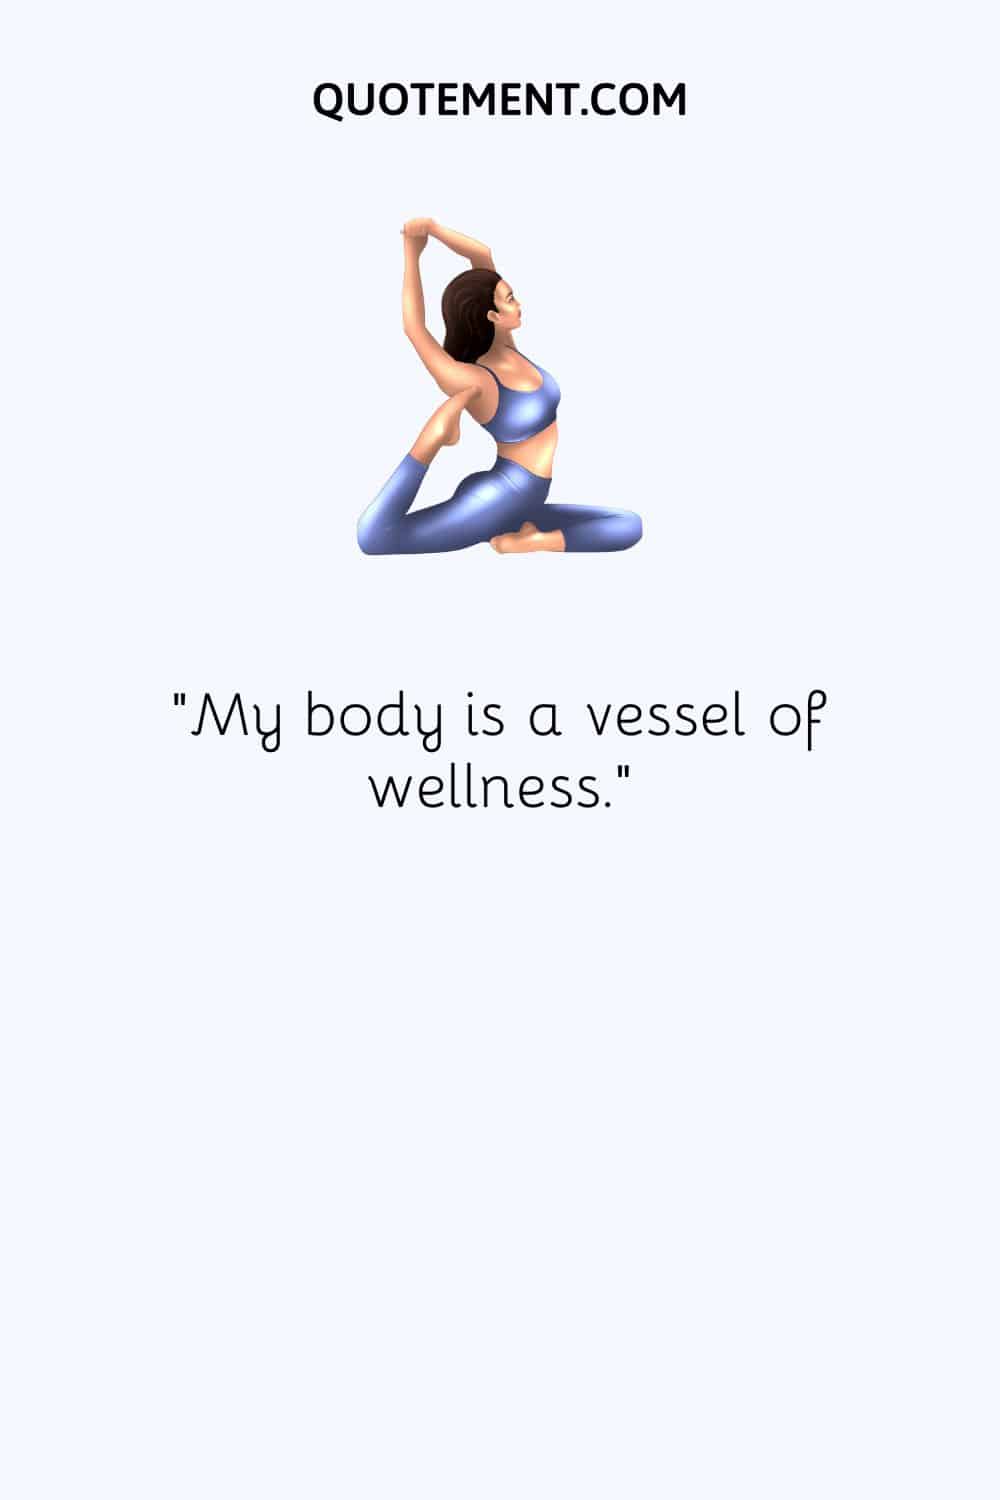 woman doing yoga image representing the best health affirmation